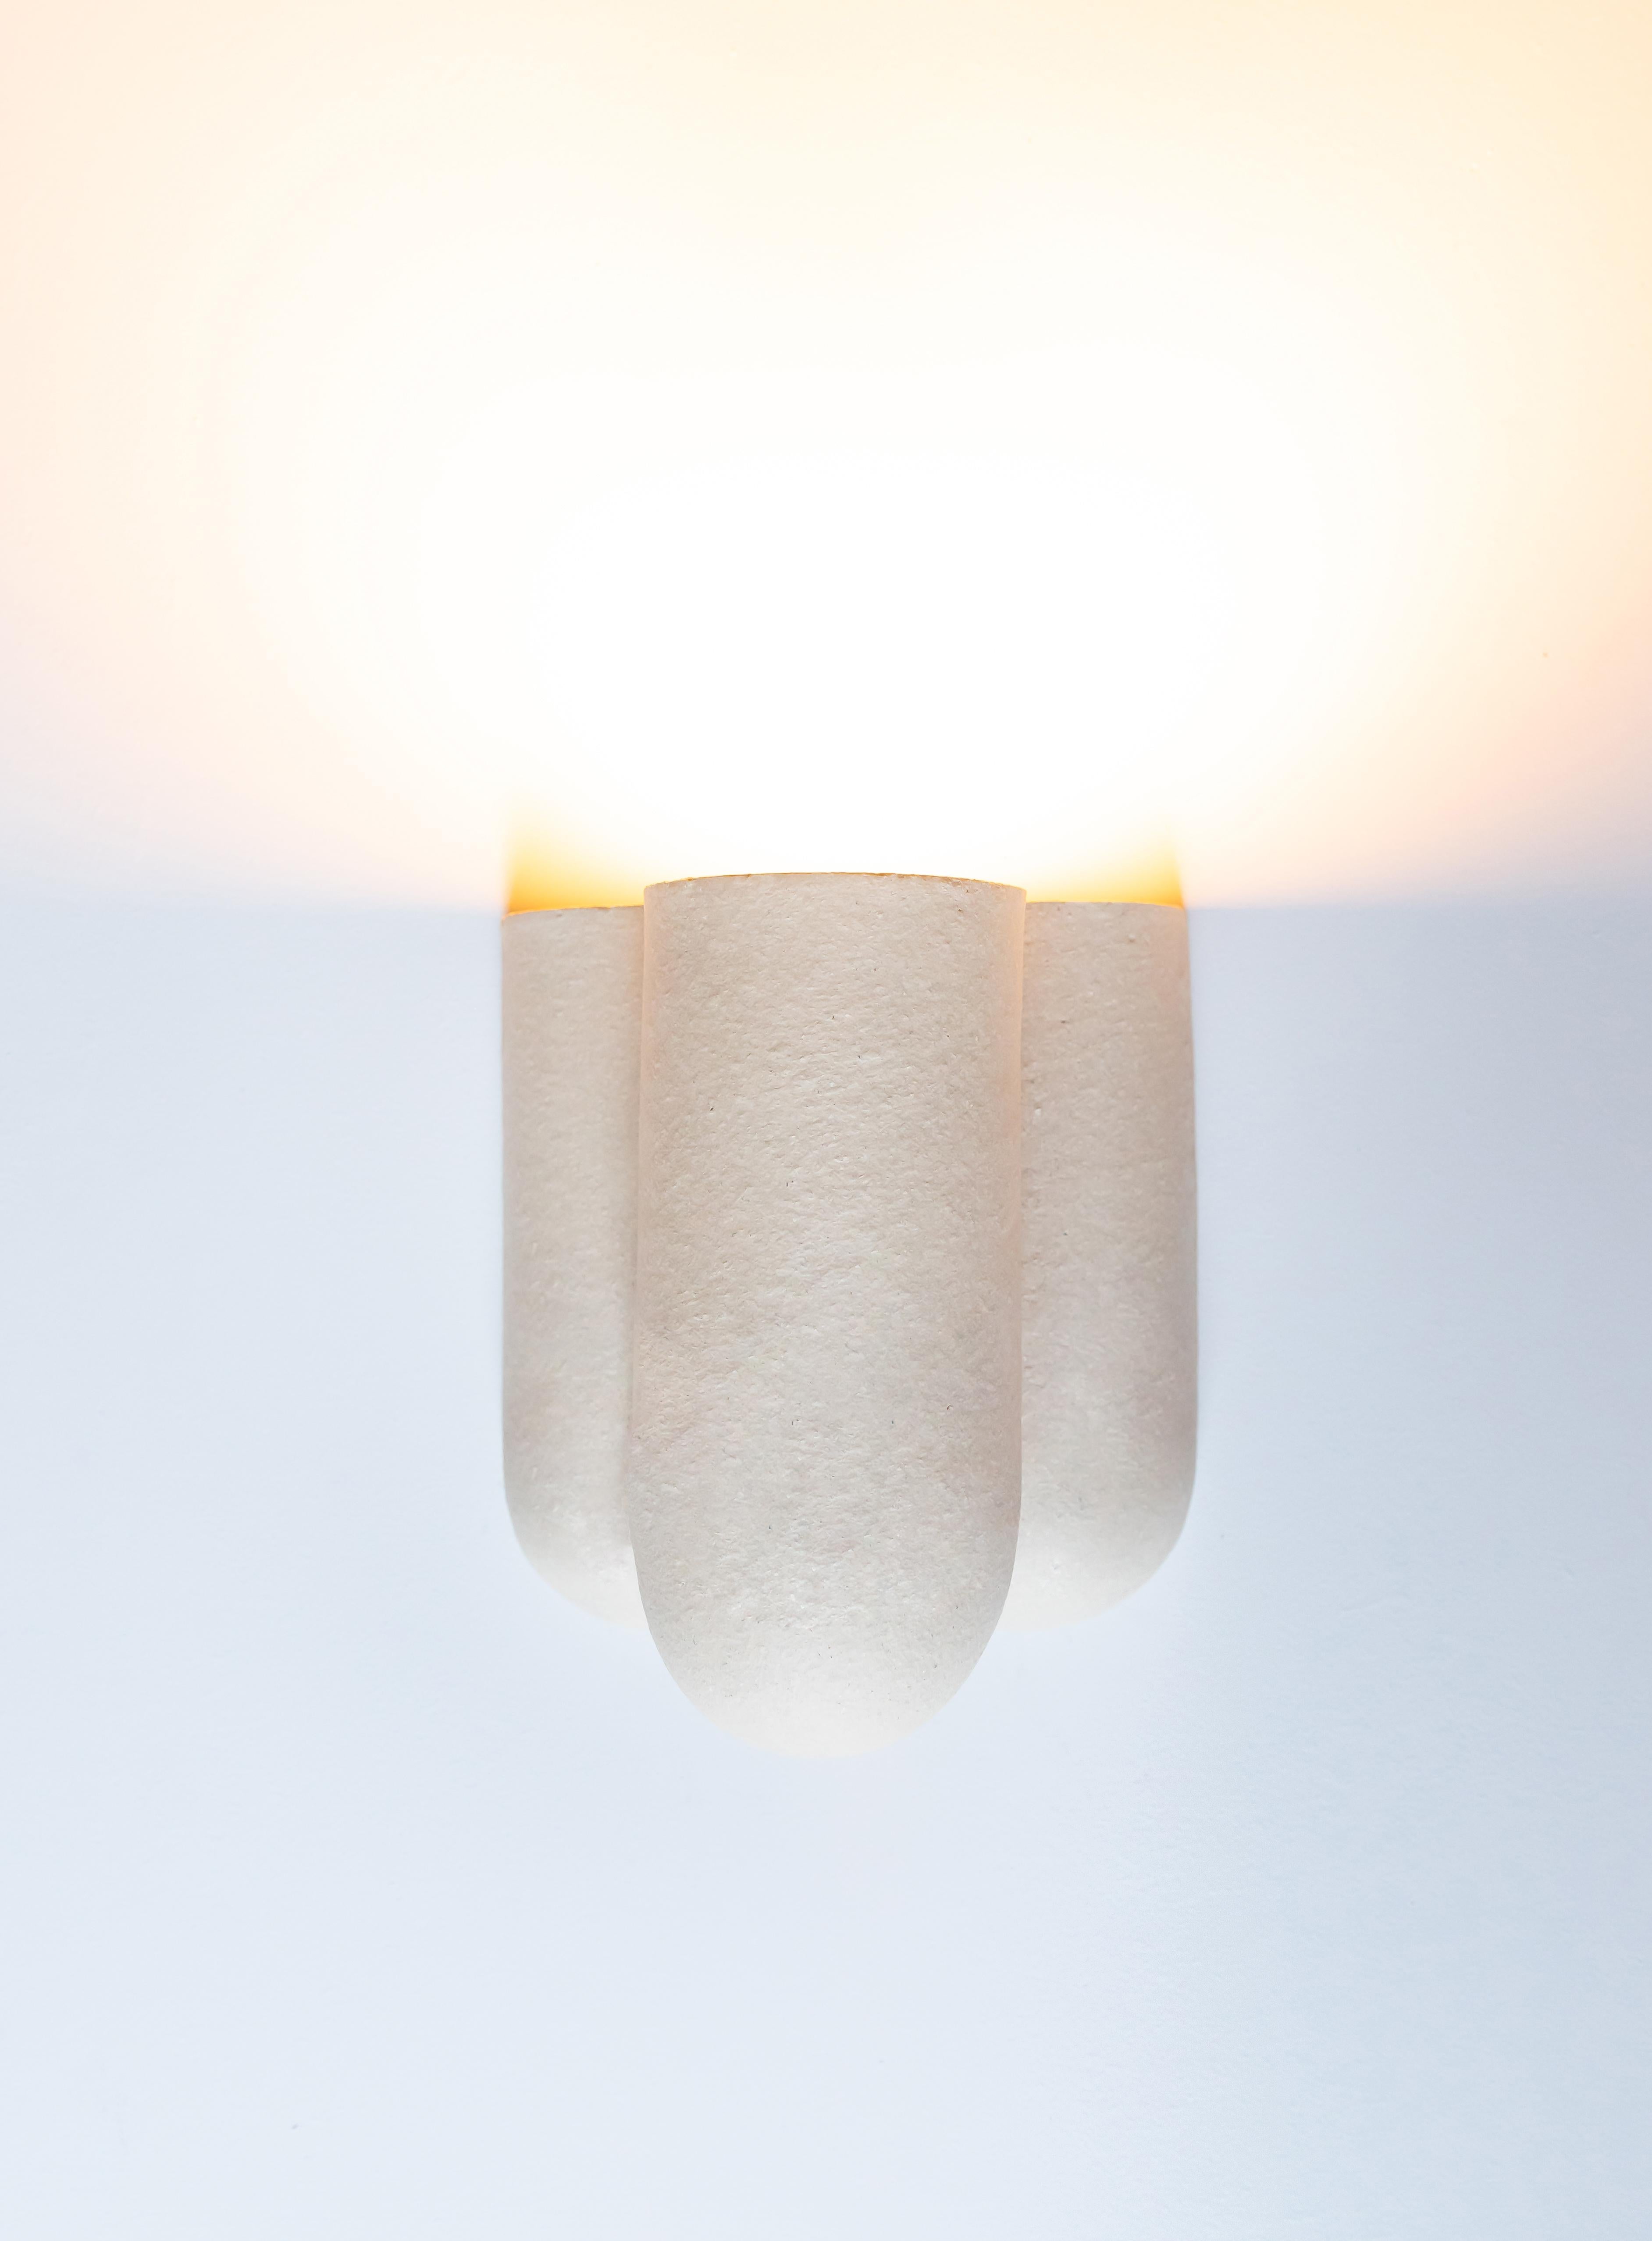 Wall light by Lisa Allegra
Dimensions: W 24 x D 17 x H 22,5 cm
Materials: Clay
Variations available, dusty pink and blackened gold. 

Born in 1986 in Paris, Lisa Allegra has earned in 2010 a degree in furniture design from the École Supérieure